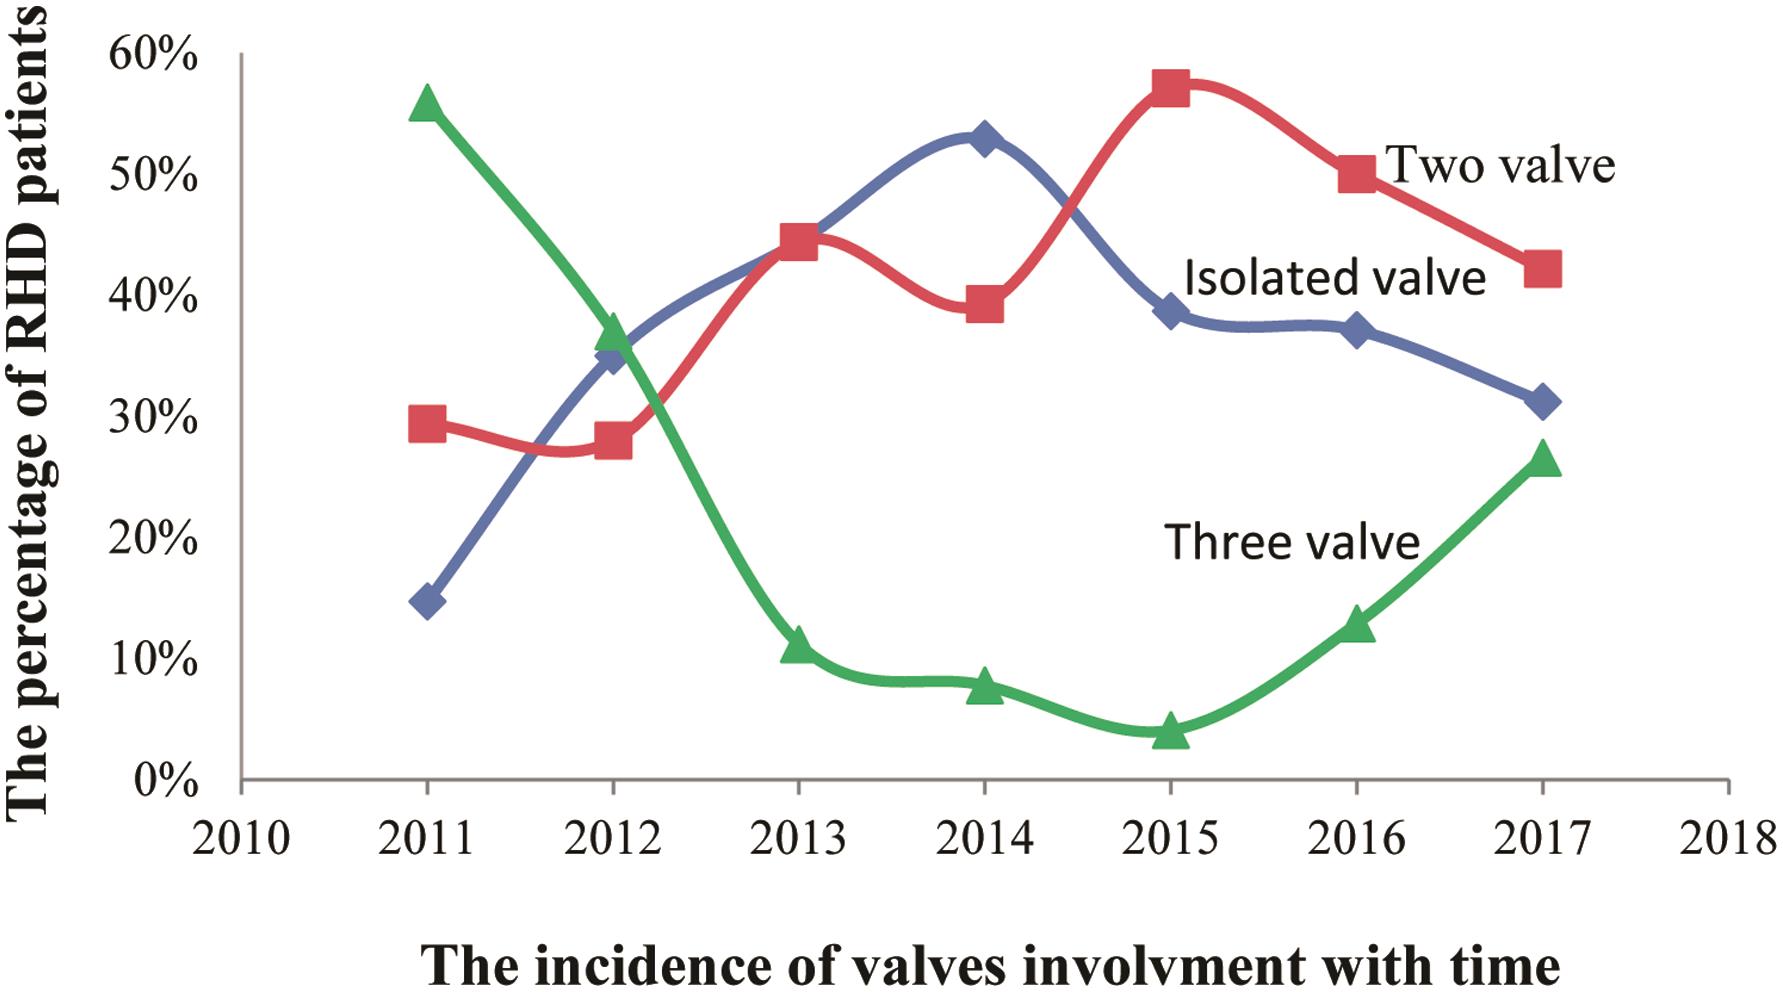 Prevalence of valvular abnormality in patients with rheumatic heart disease.